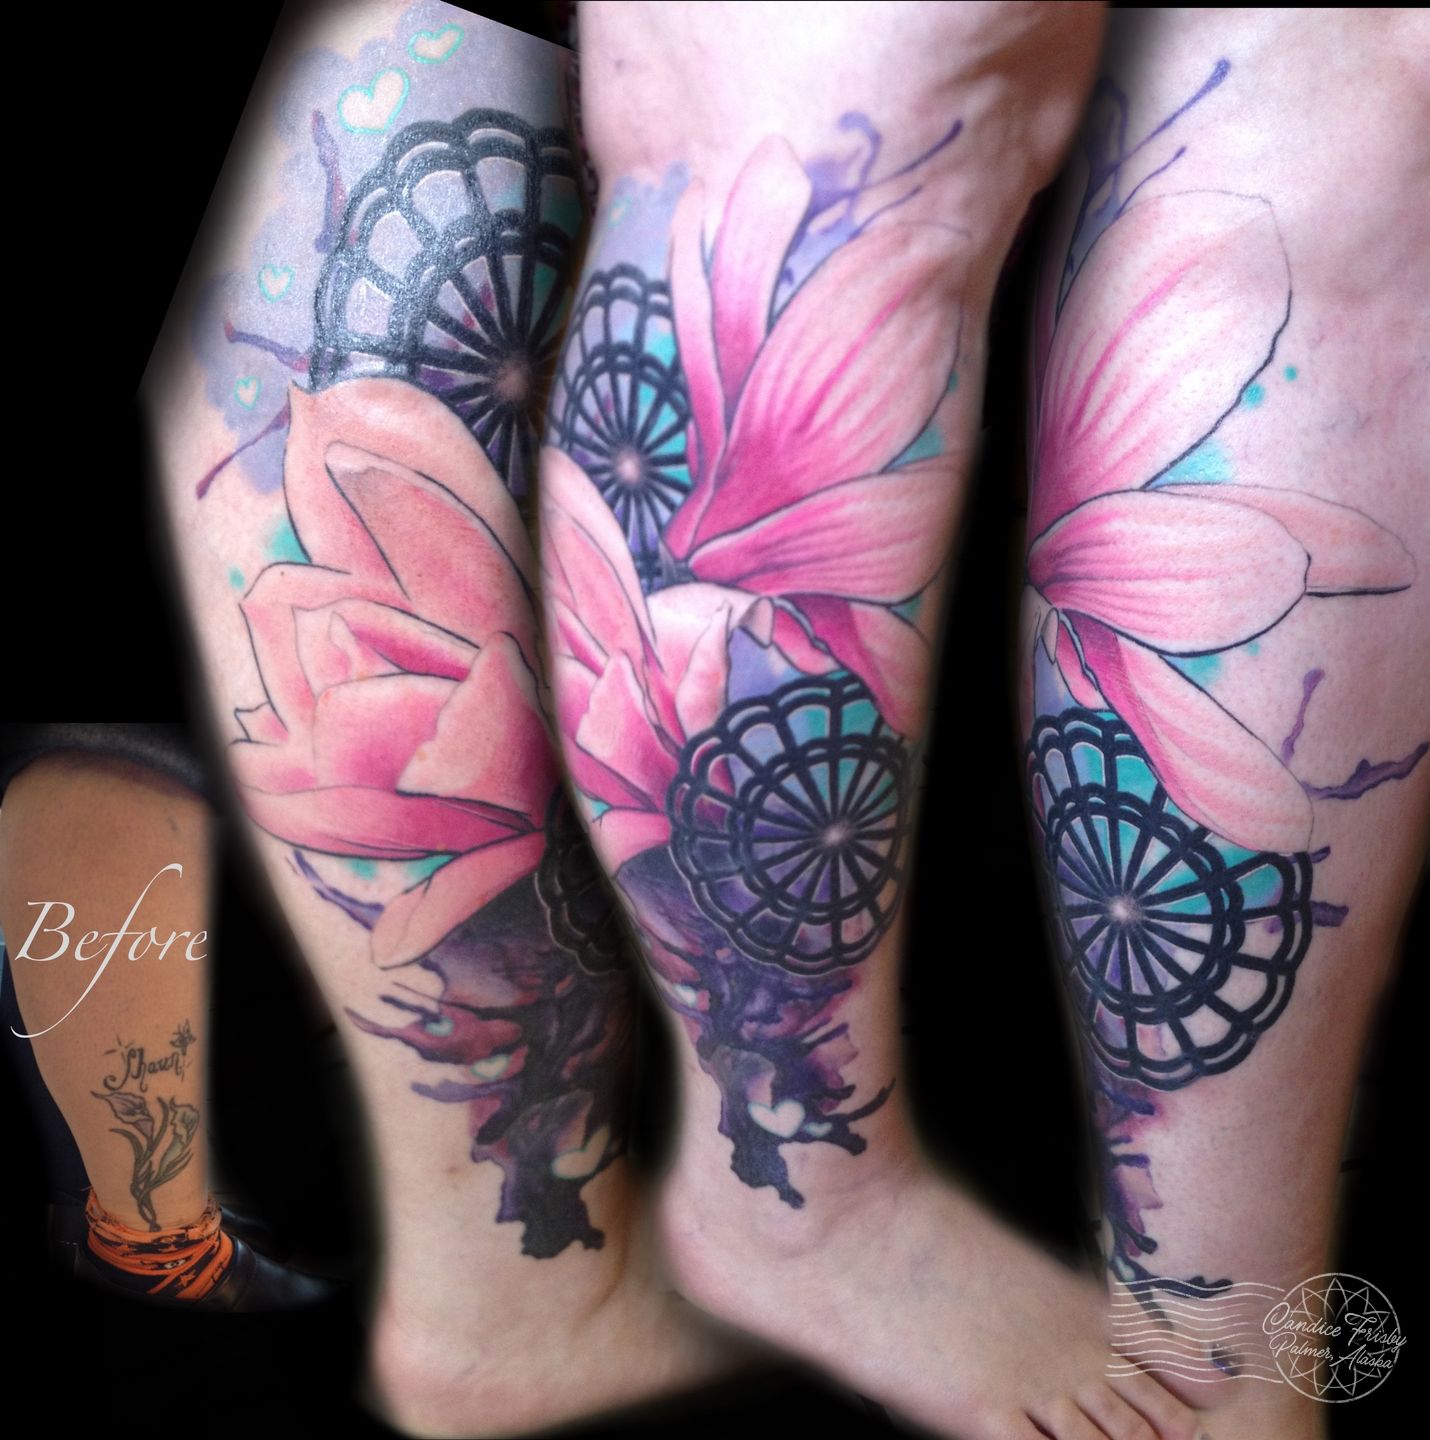 Tattoo uploaded by Thedoud Cissé  Skull and flower on the calf  Tattoodo